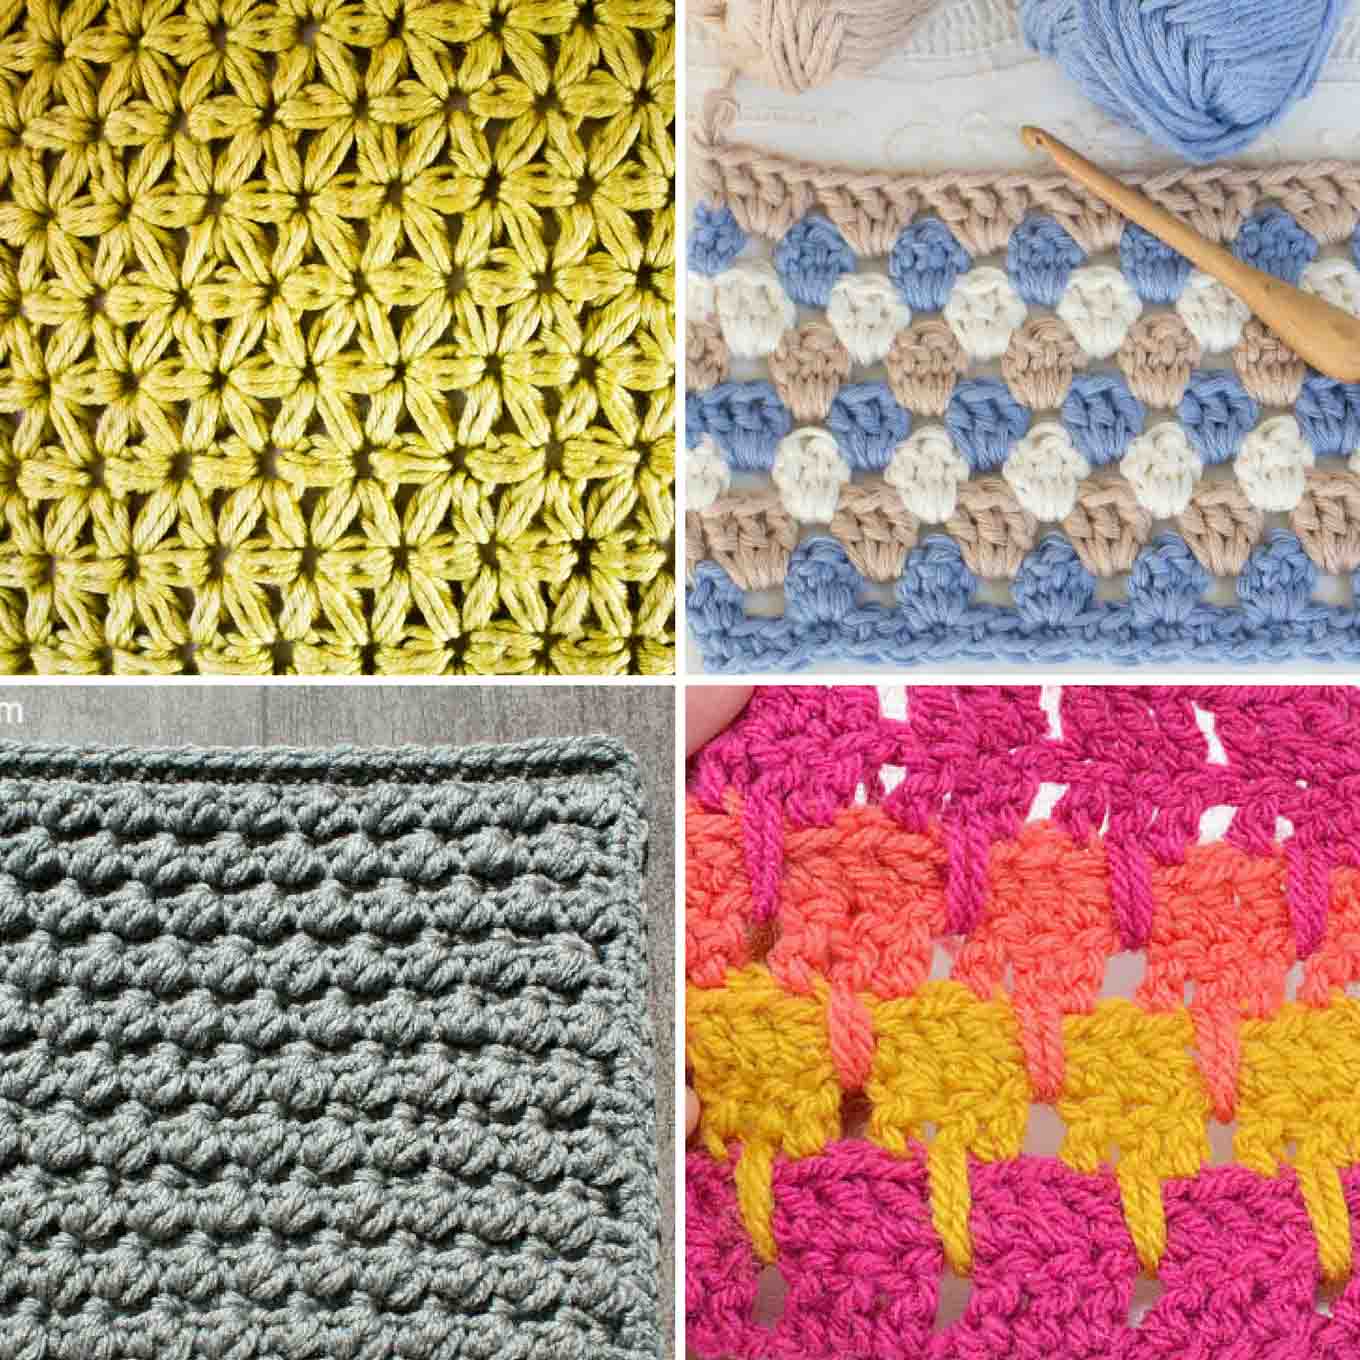 25+ crochet stitches for blankets and afghans - make u0026 do crew znmcmdk